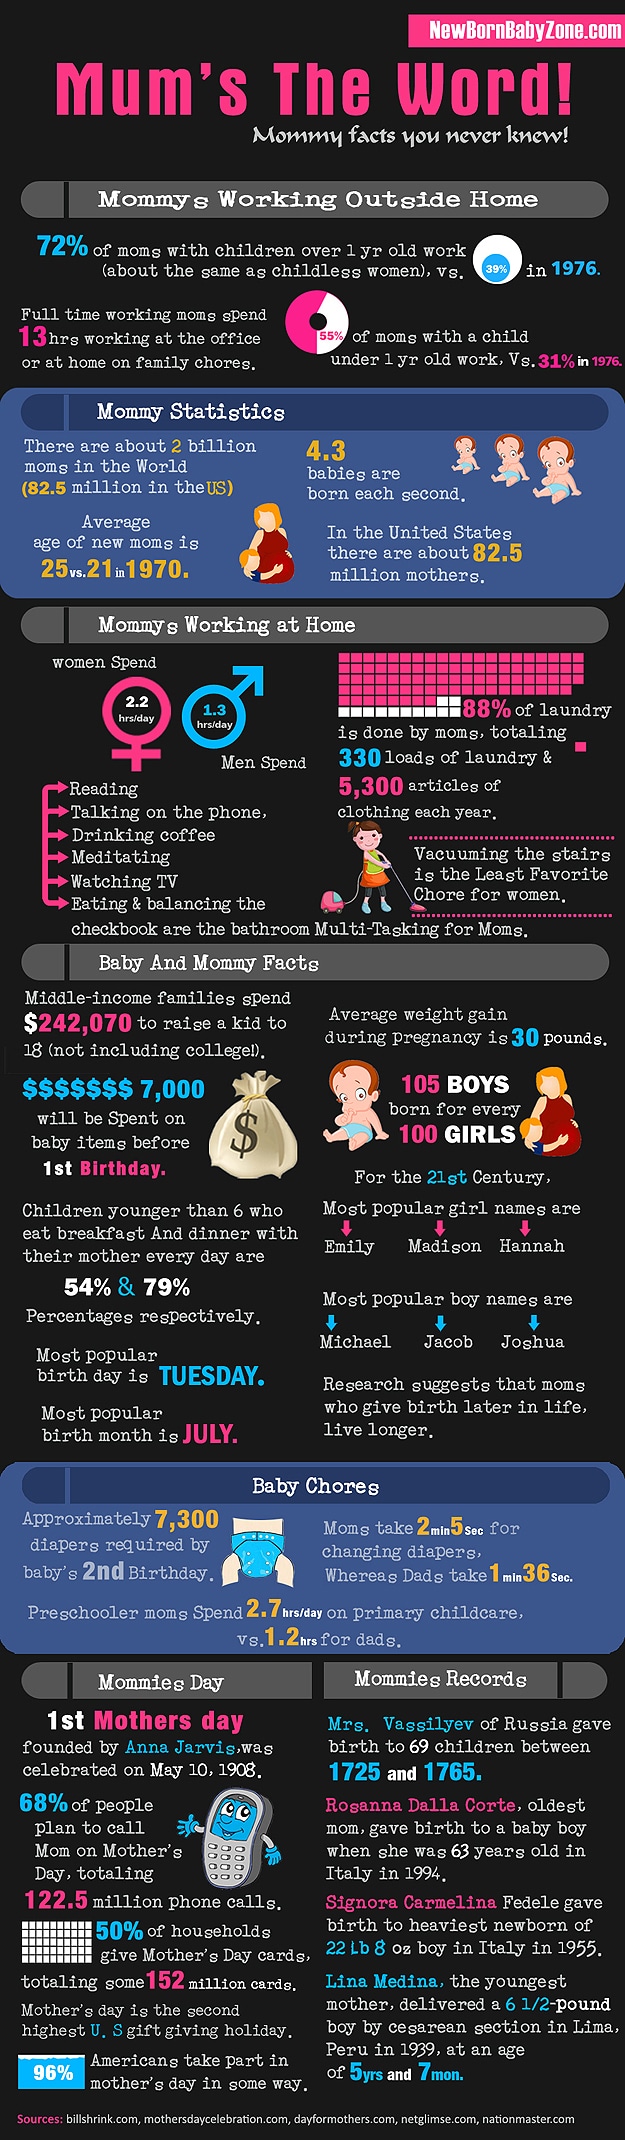 Yay For Moms! Mommy Facts You Never Knew [Infographic]